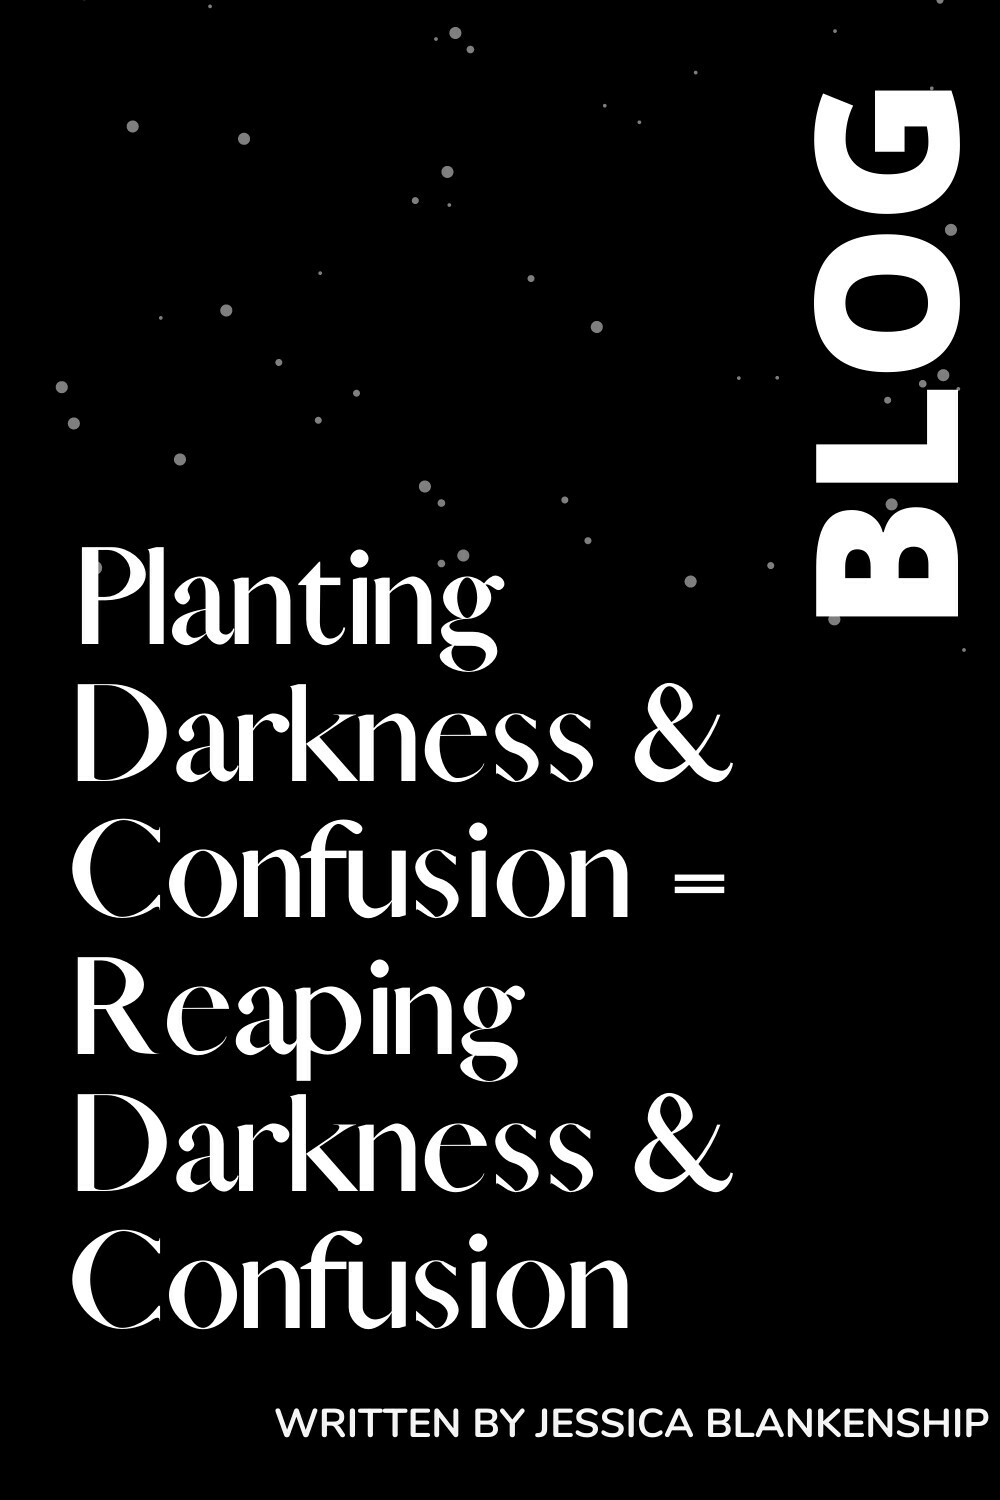 Planting Darkness & Confusion= Reaping Darkness & Confusion